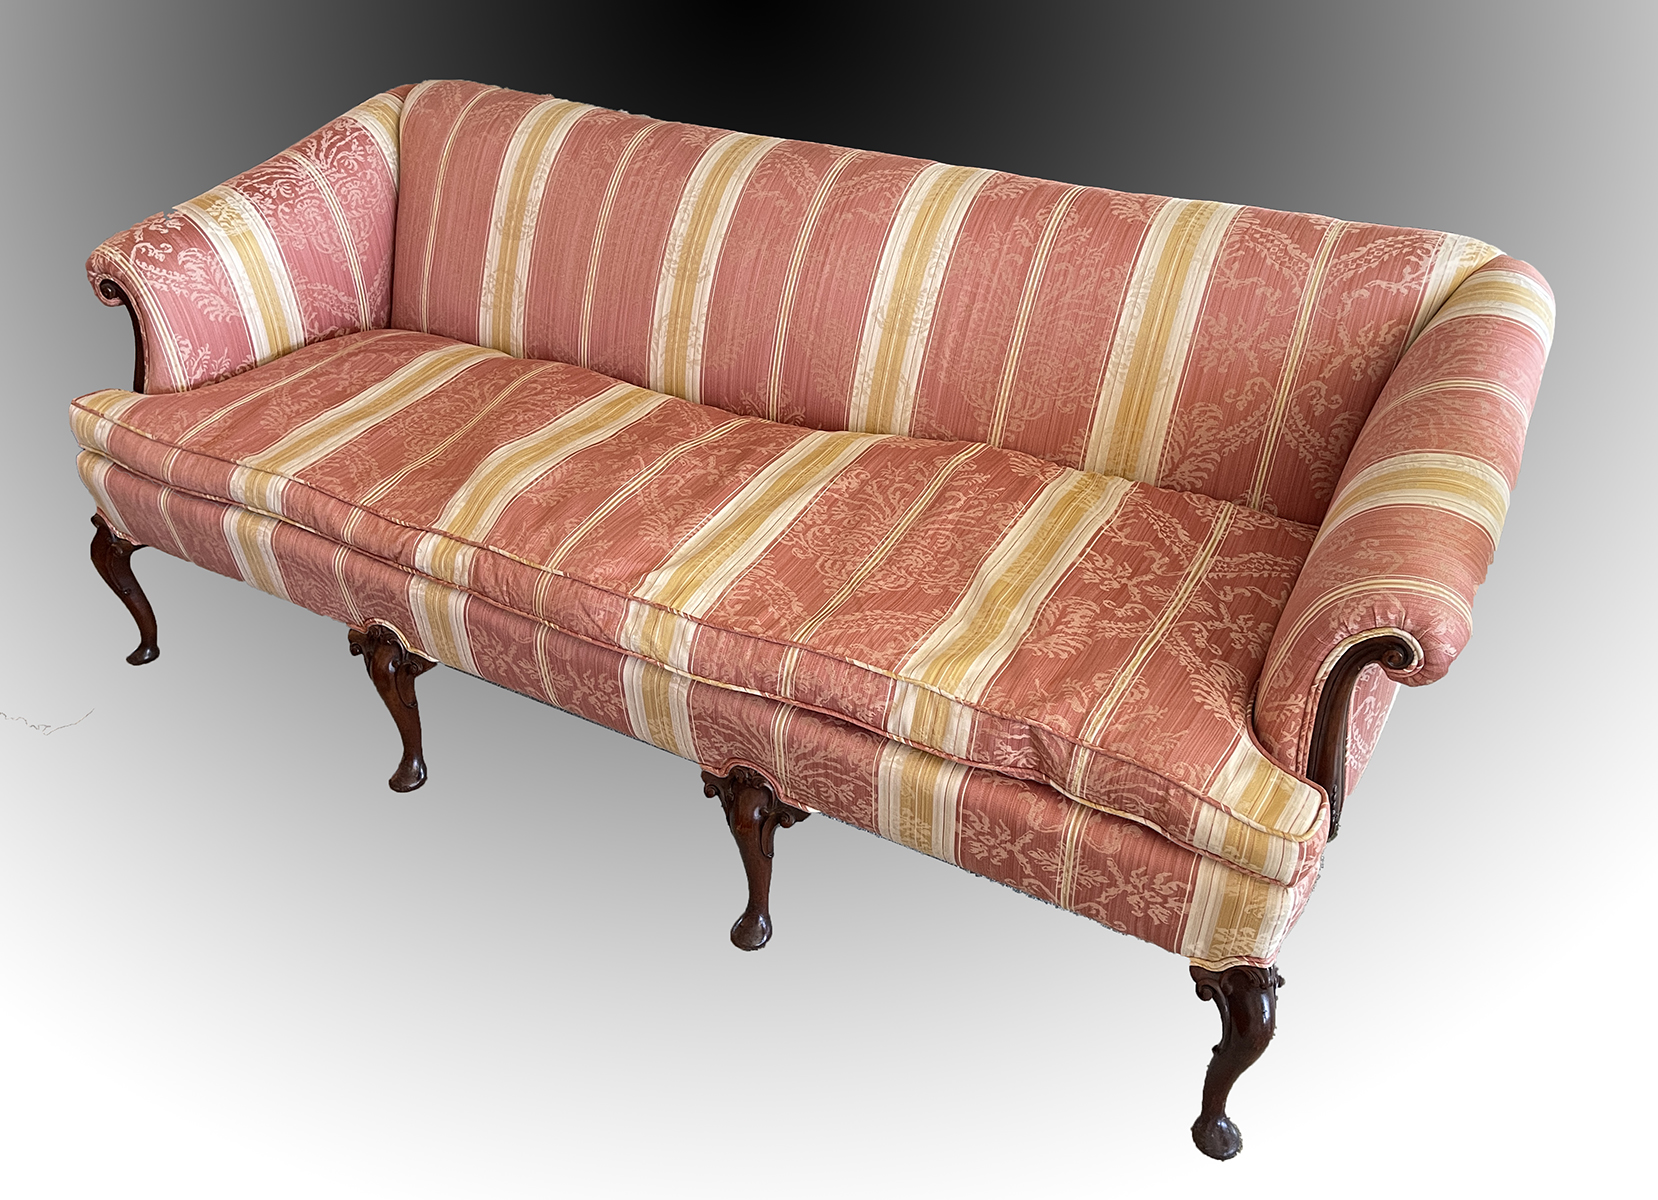 QUEEN ANNE SOFA: Striped upholstery